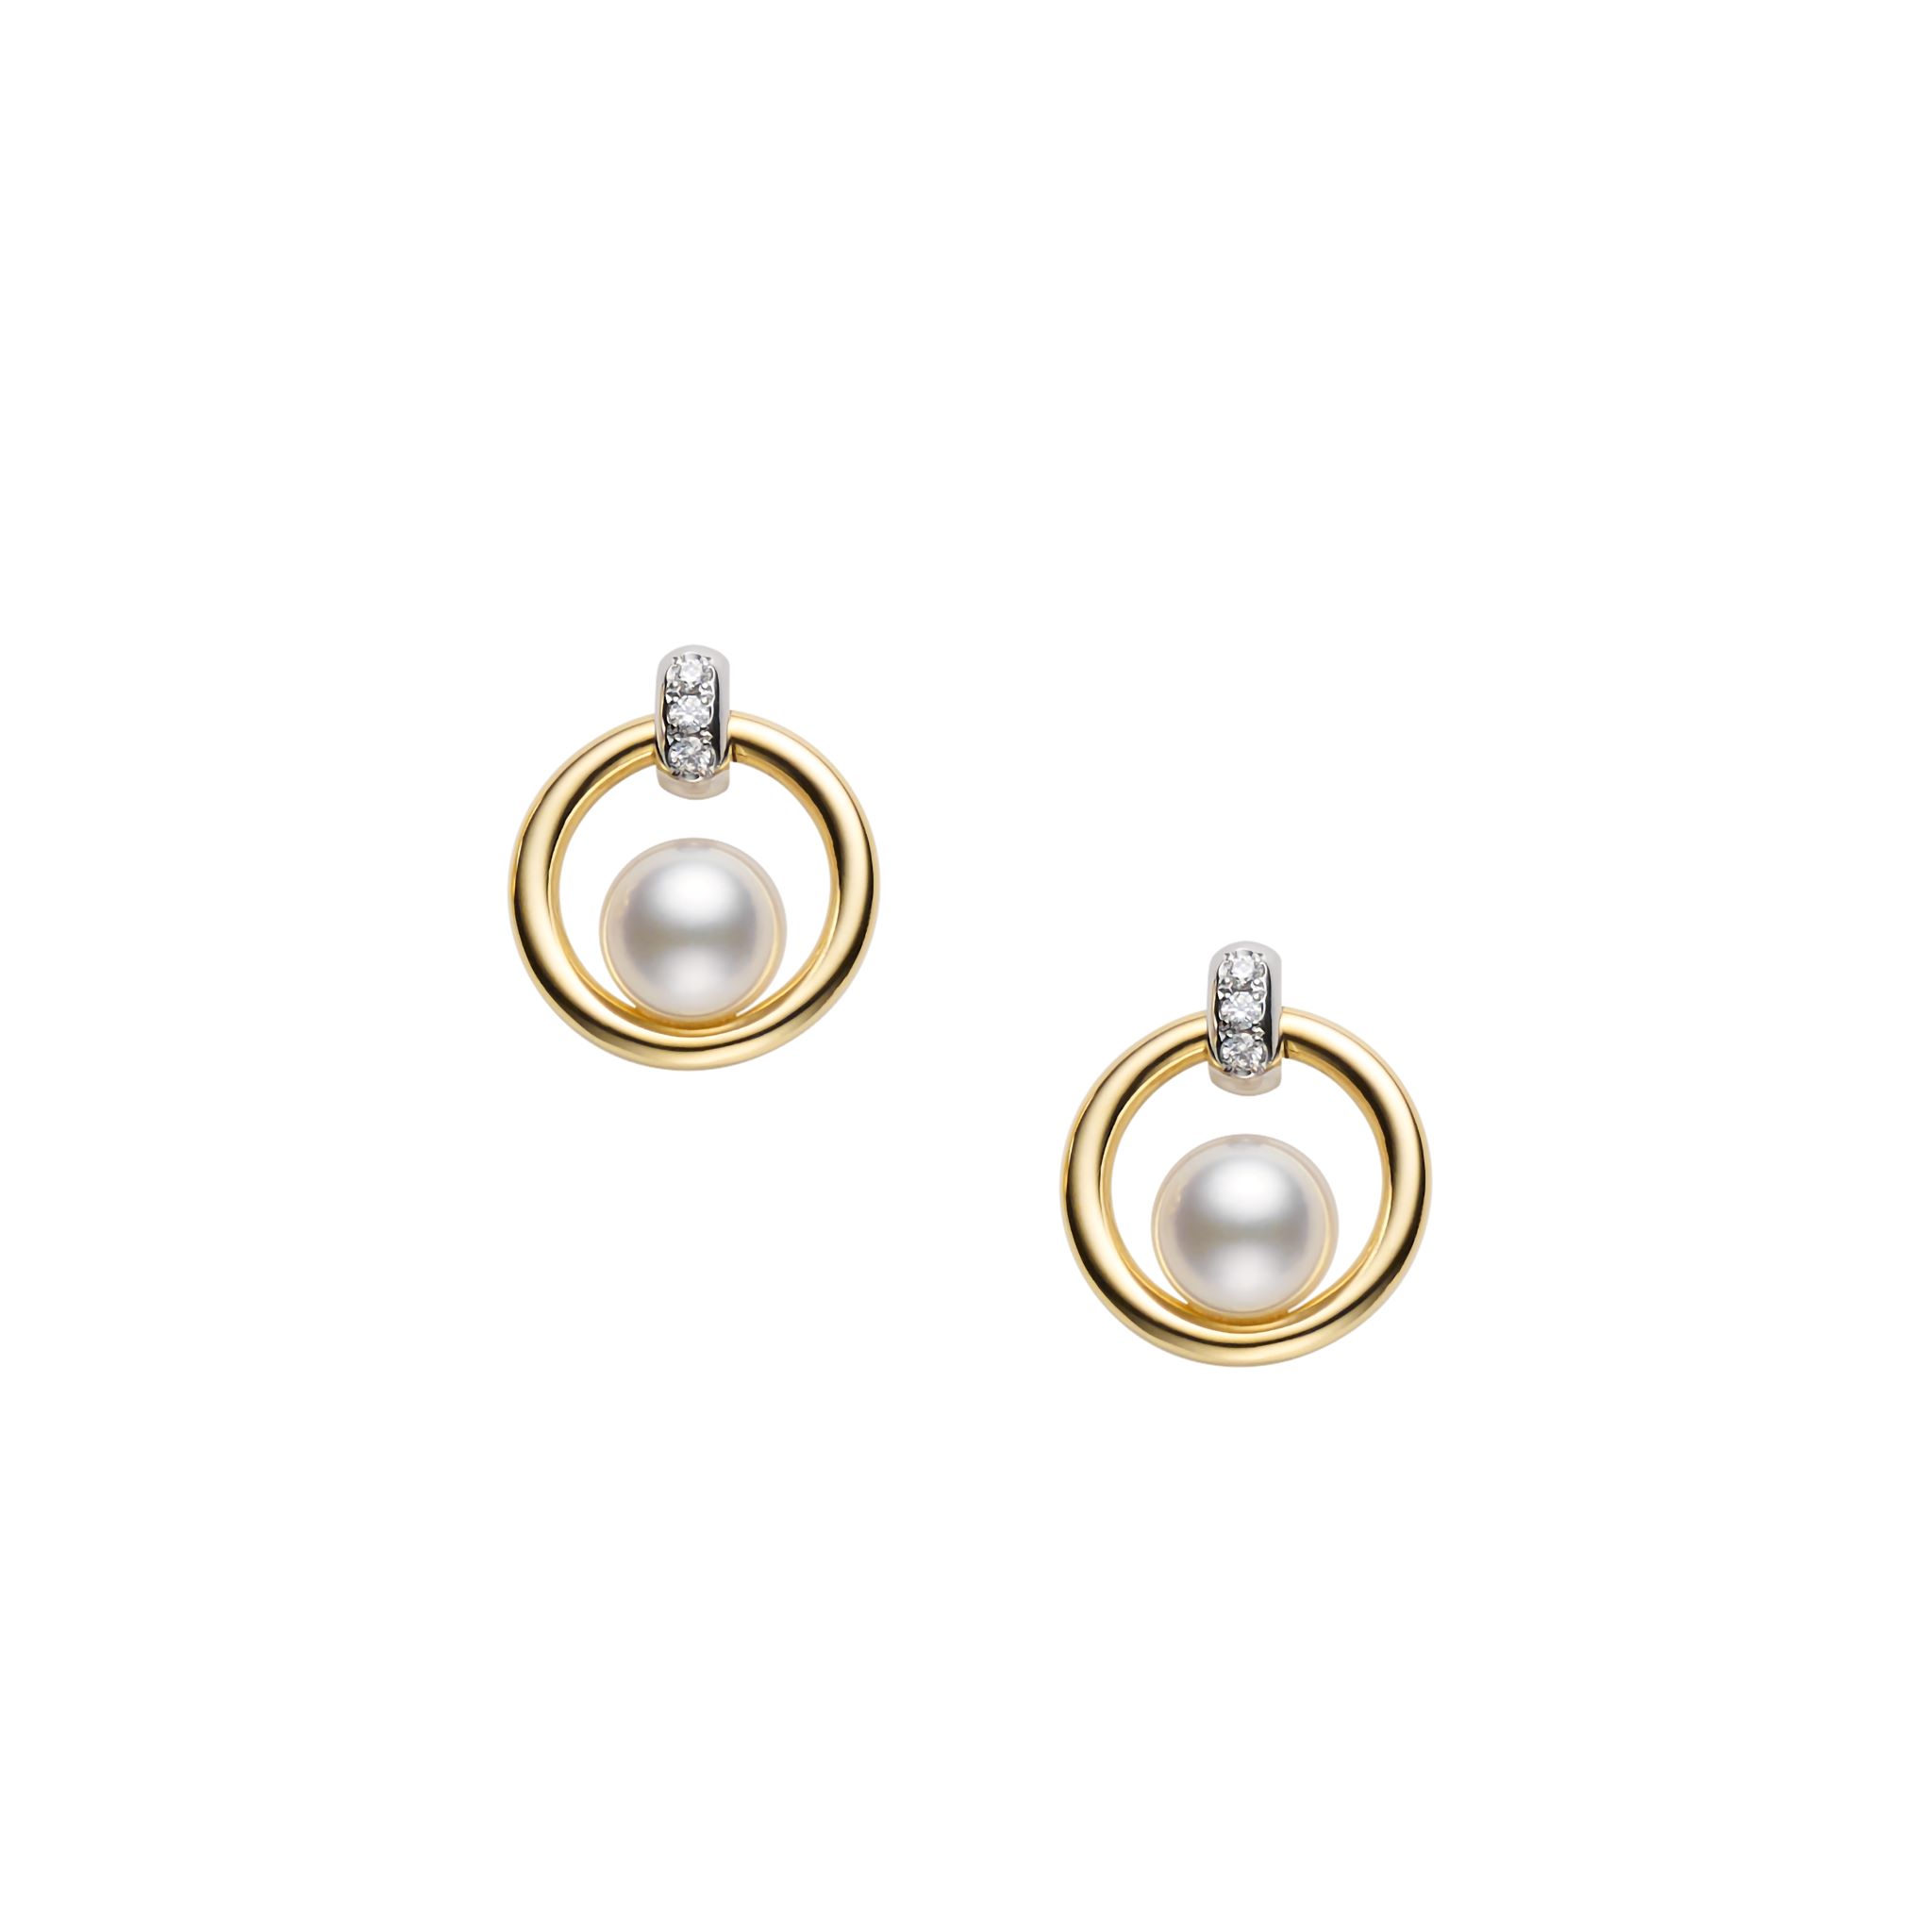 This pair of pearl and diamond cradle earrings by Mikimoto is crafted from 18k yellow gold and features 5.5mm Akoya pearls and 0.02 total carats of diamonds.